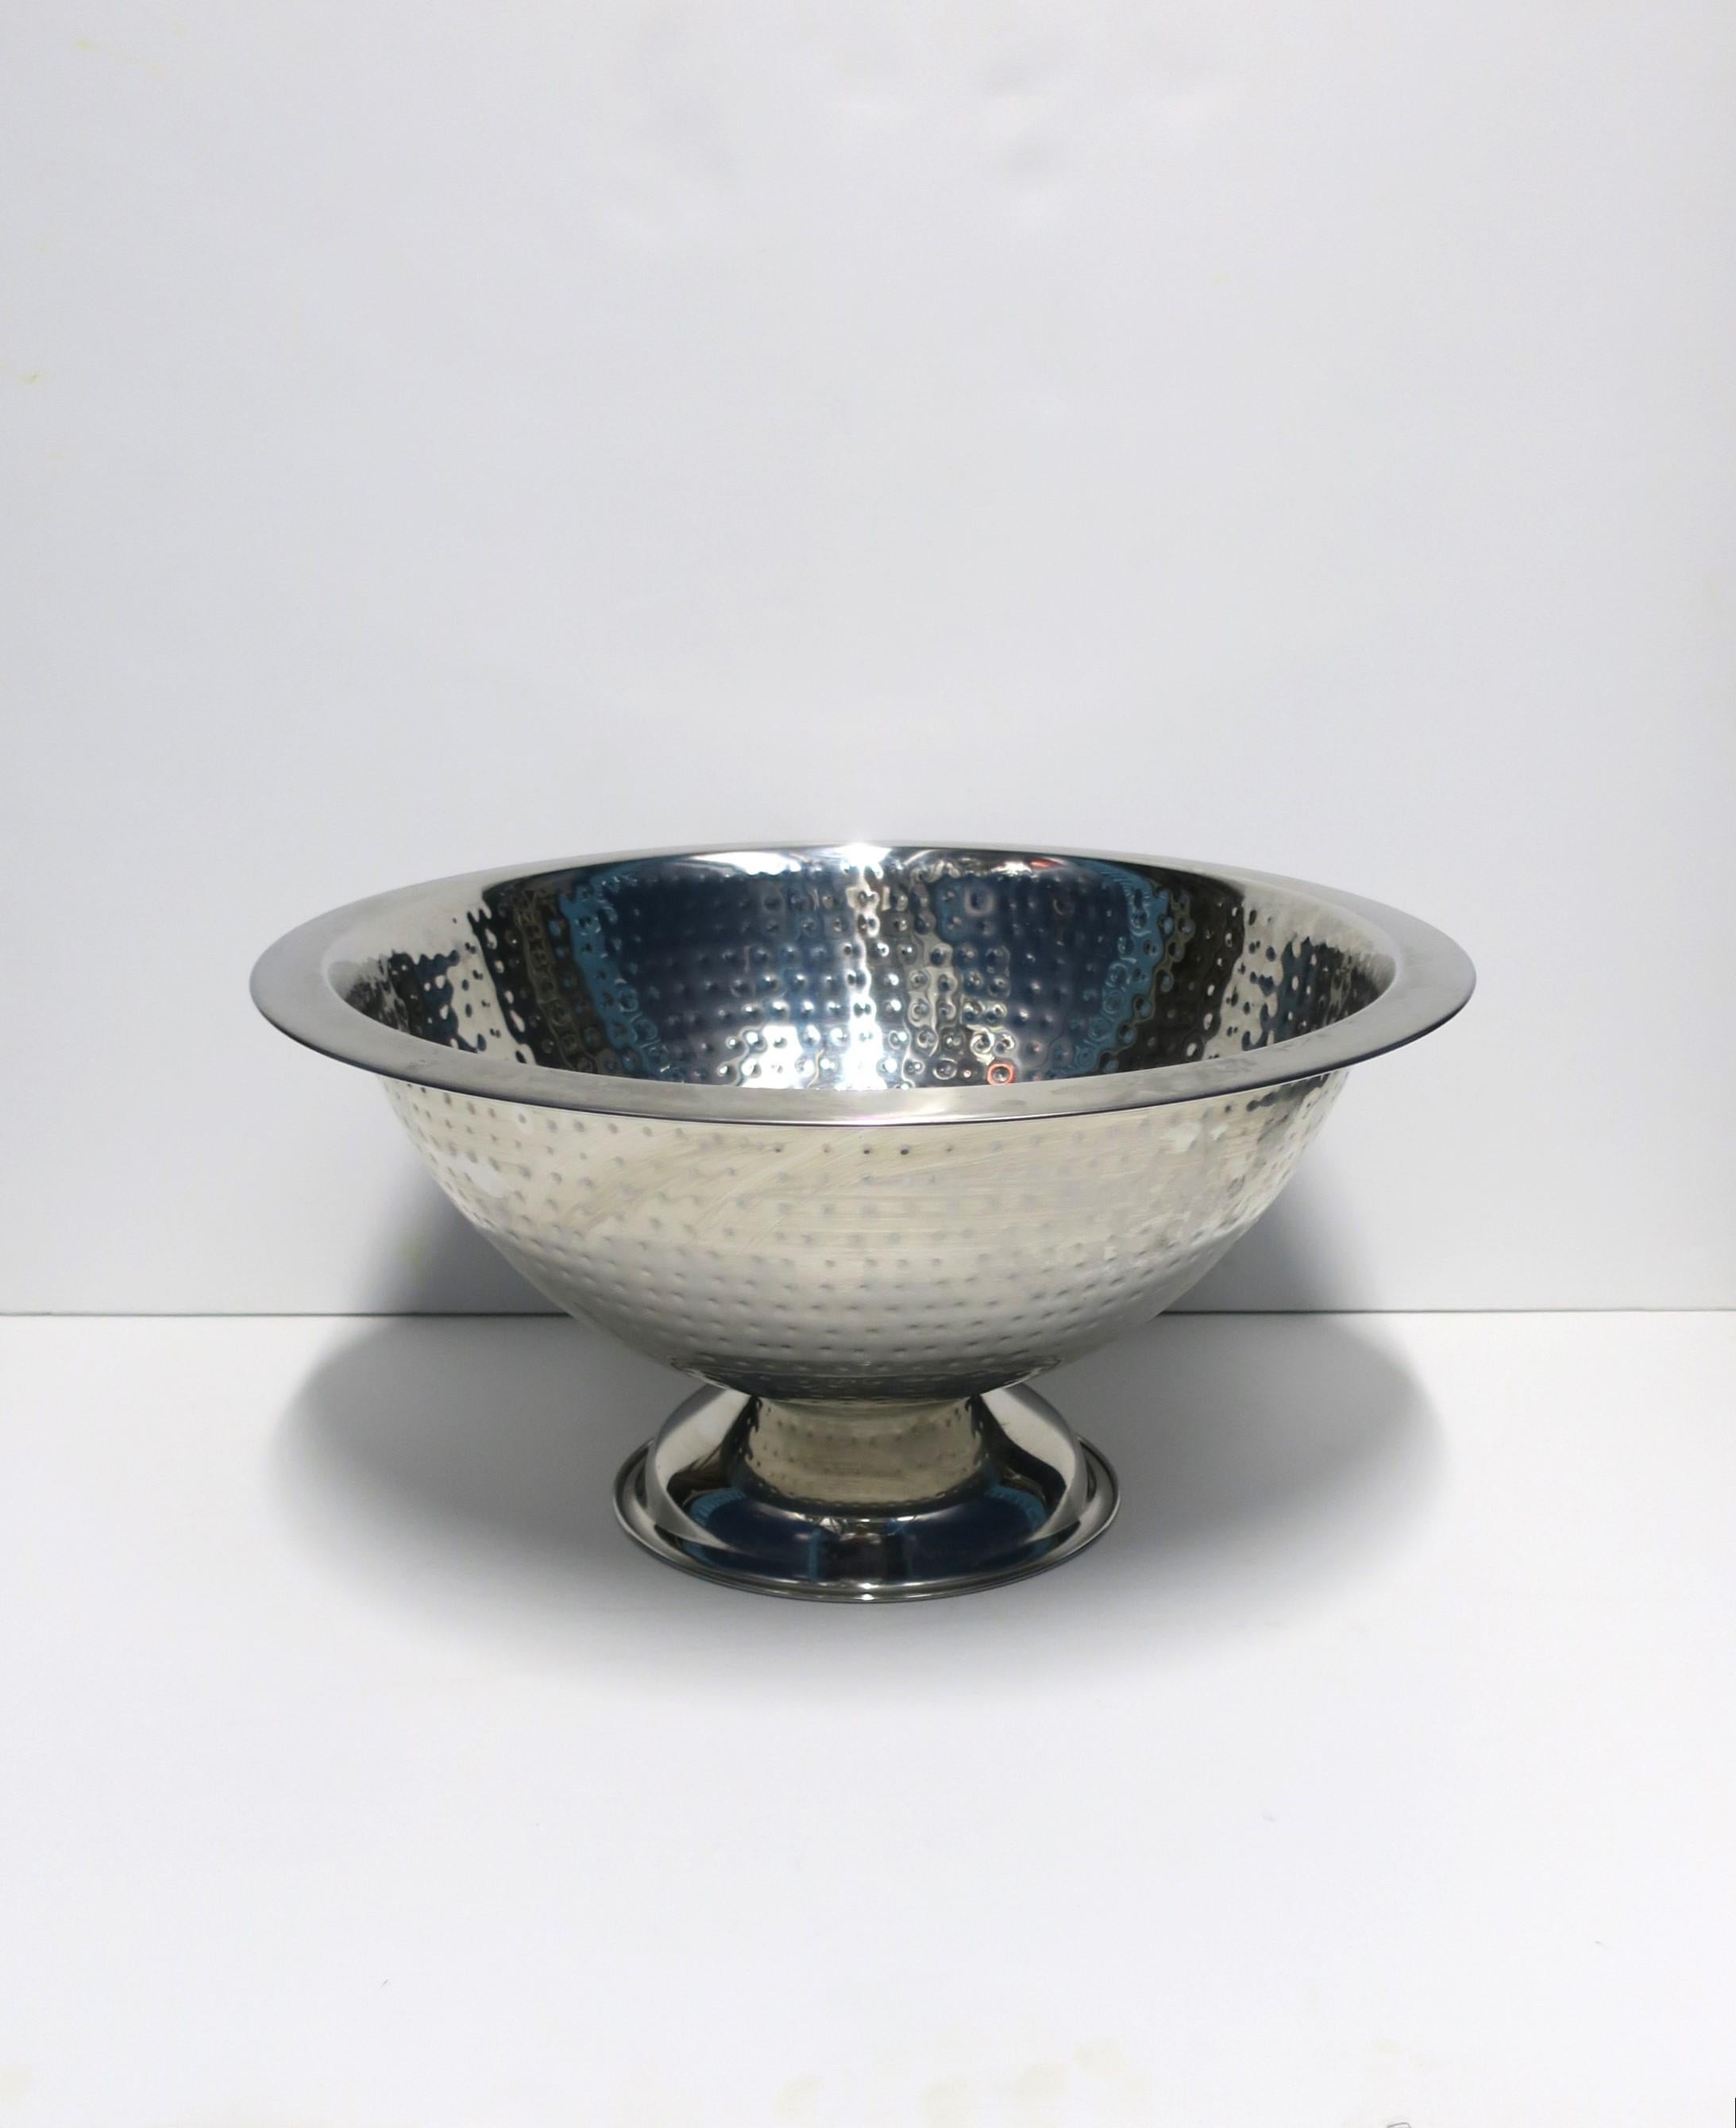 A relatively large round metal Champagne wine cooler or ice bucket in an urn form with hammered design, circa 21st century. A great piece for Champagne, wine, water, beer, etc., seafood, etc., a must for keeping beverages or other items cold when